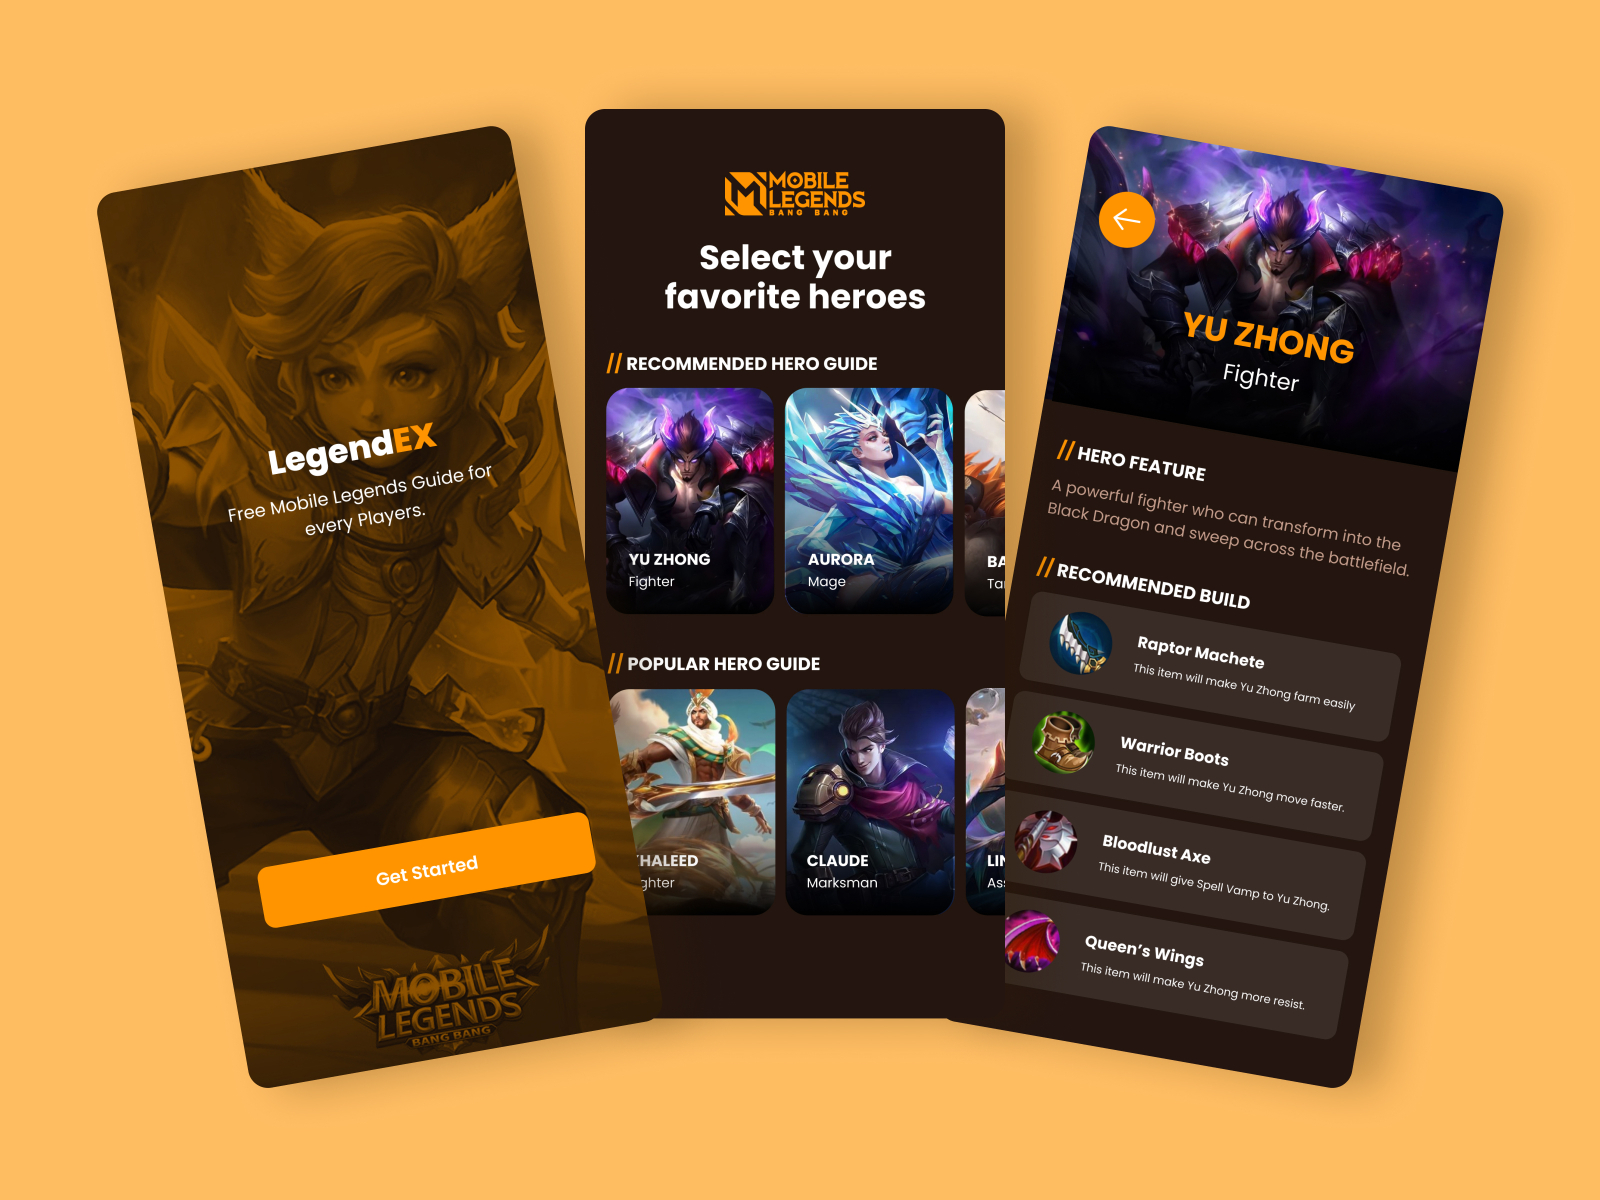 Mobile Legends guide: everything you need to get started